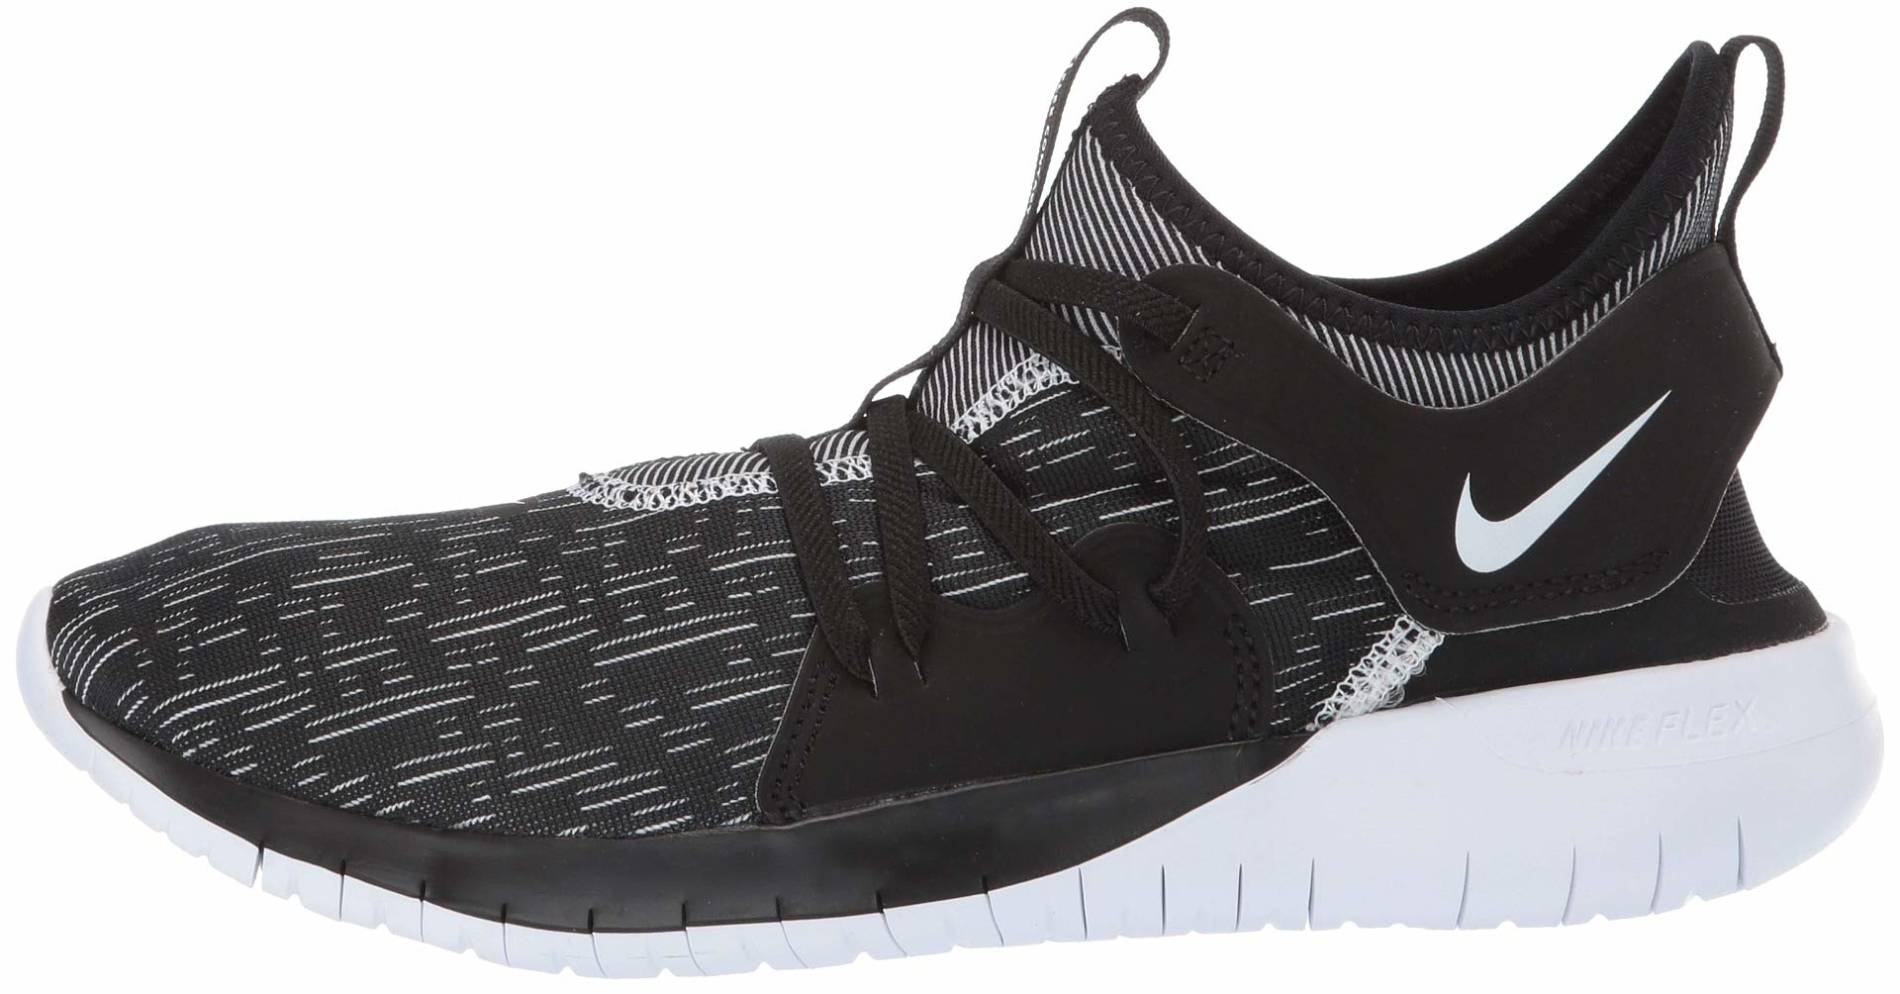 Save 53% on Nike Slip-on Running Shoes 